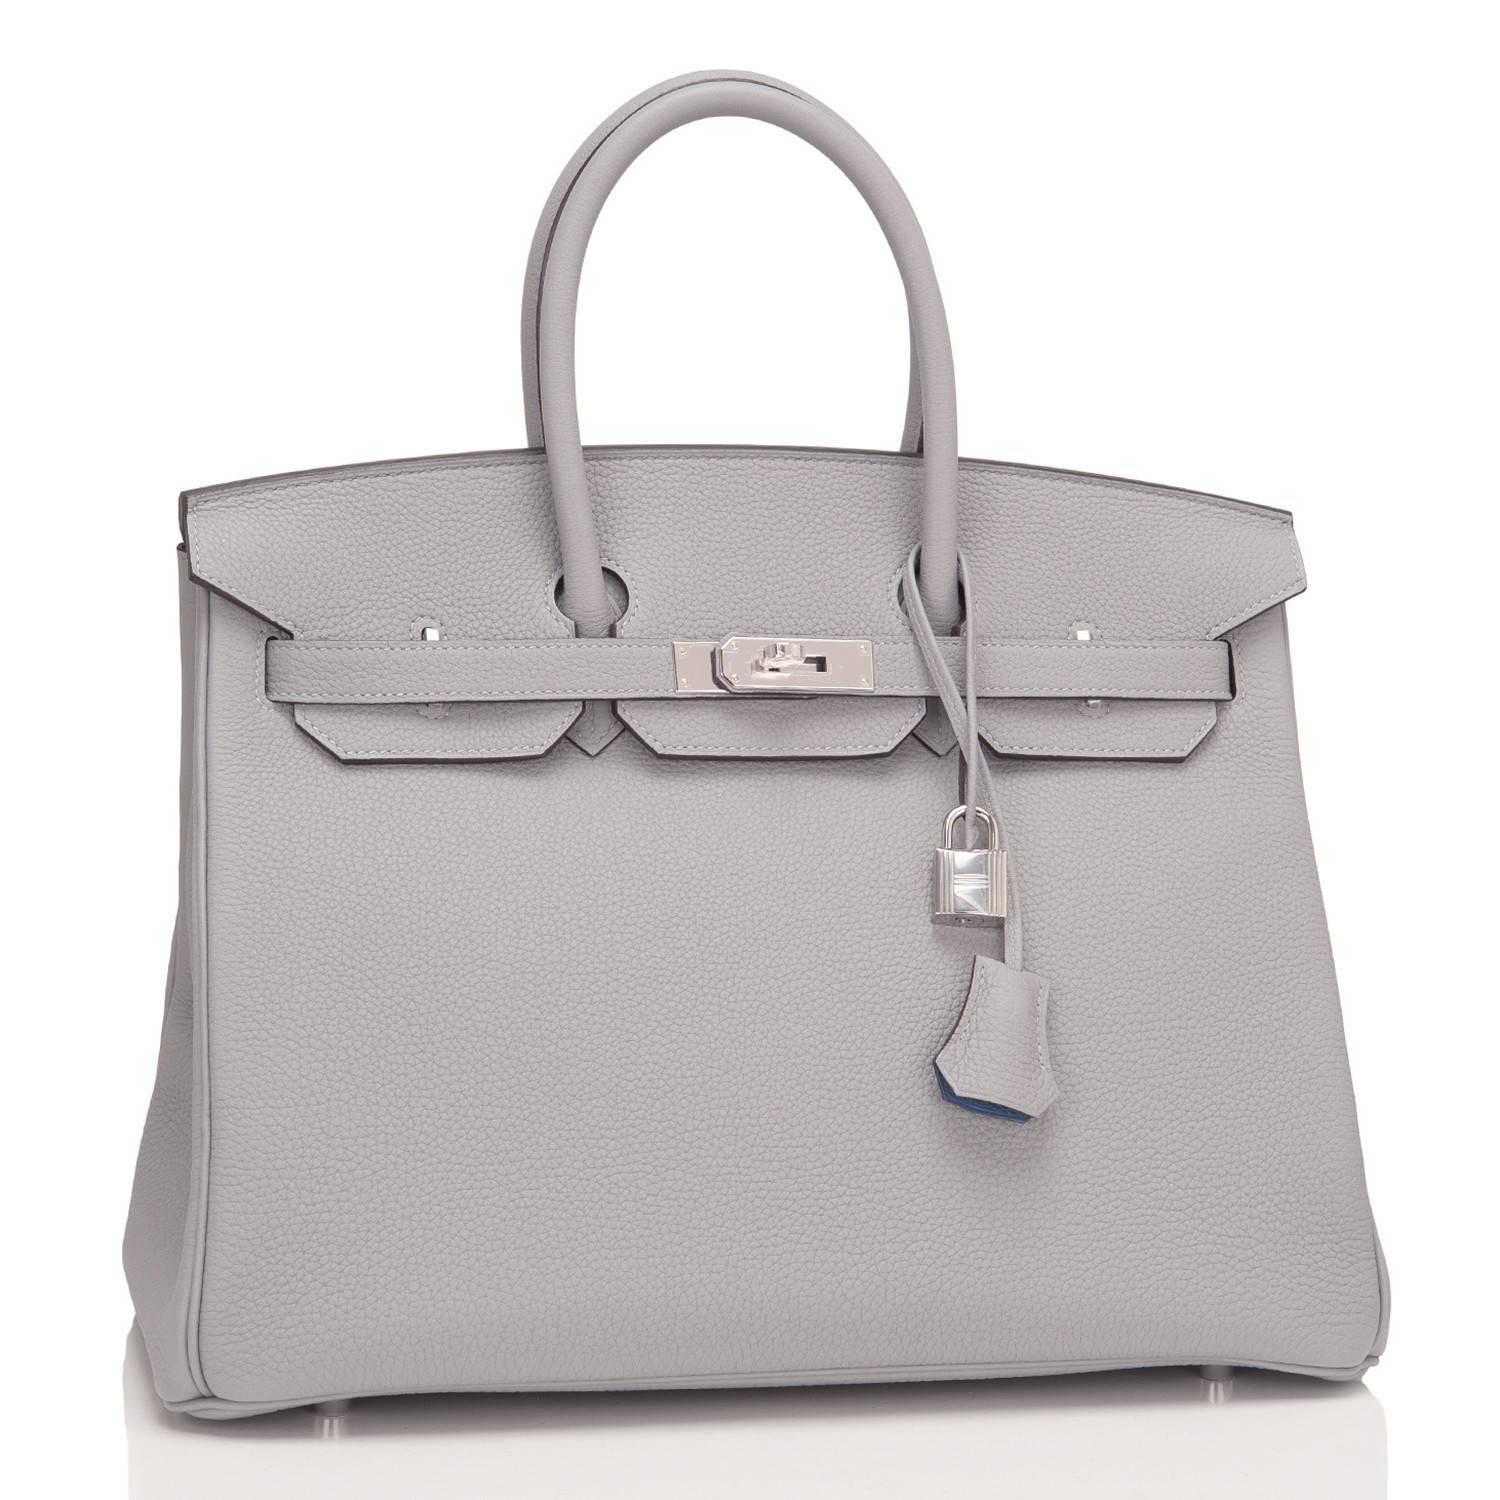 Hermes limited edition Gris Mouette Verso Birkin 35cm of togo leather with blue agate lining and palladium hardware.

This Birkin has tonal stitching, a front toggle closure, a clochette with lock and two keys, and double rolled handles.

The